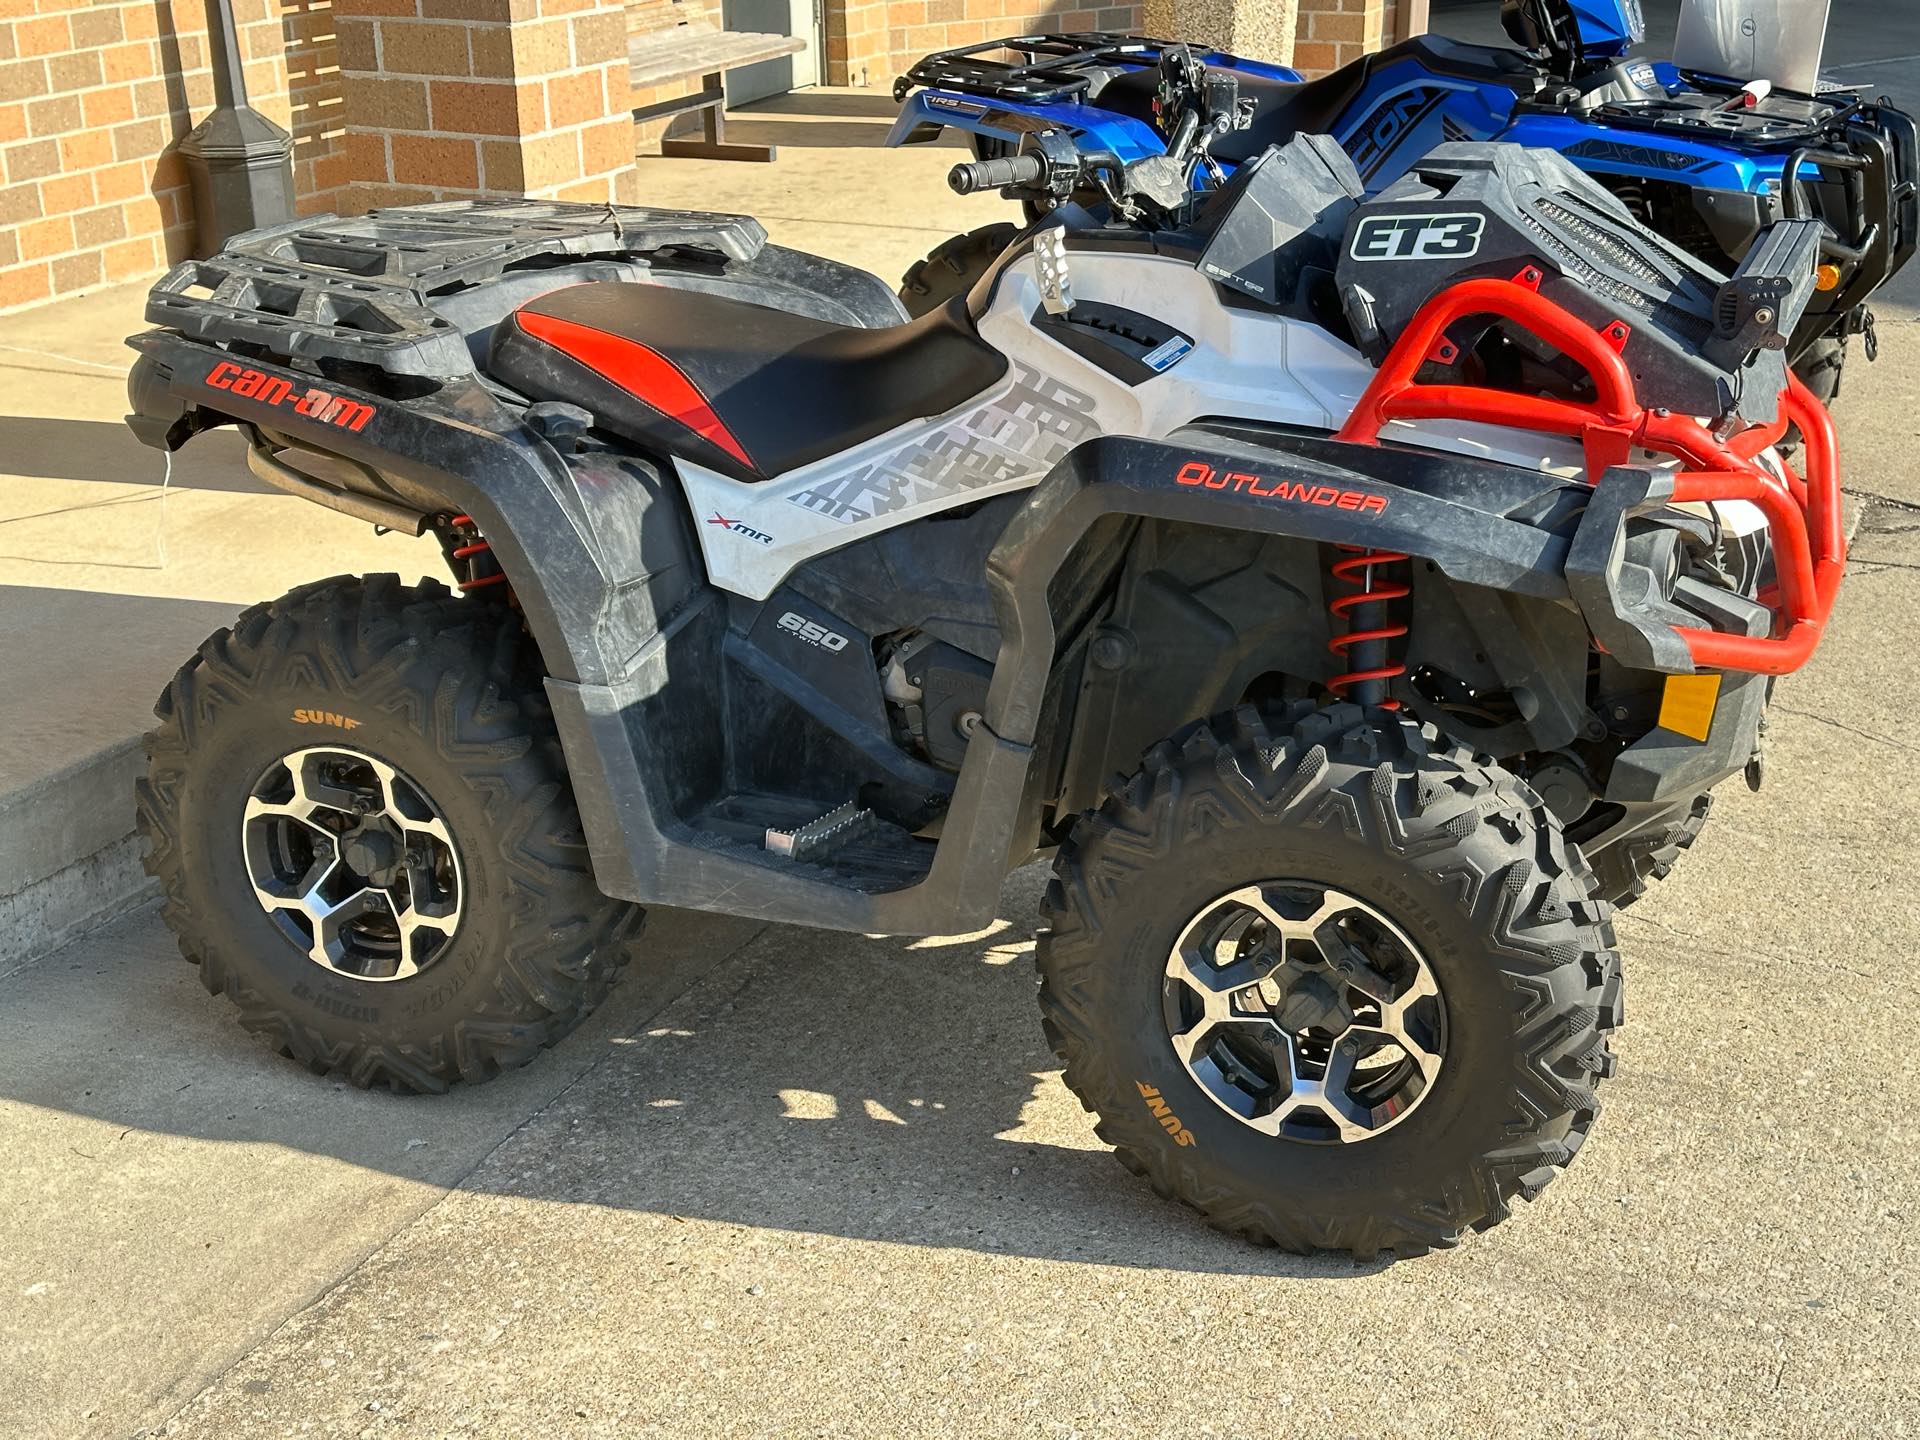 2017 Can-Am Outlander X mr 650 at Southern Illinois Motorsports